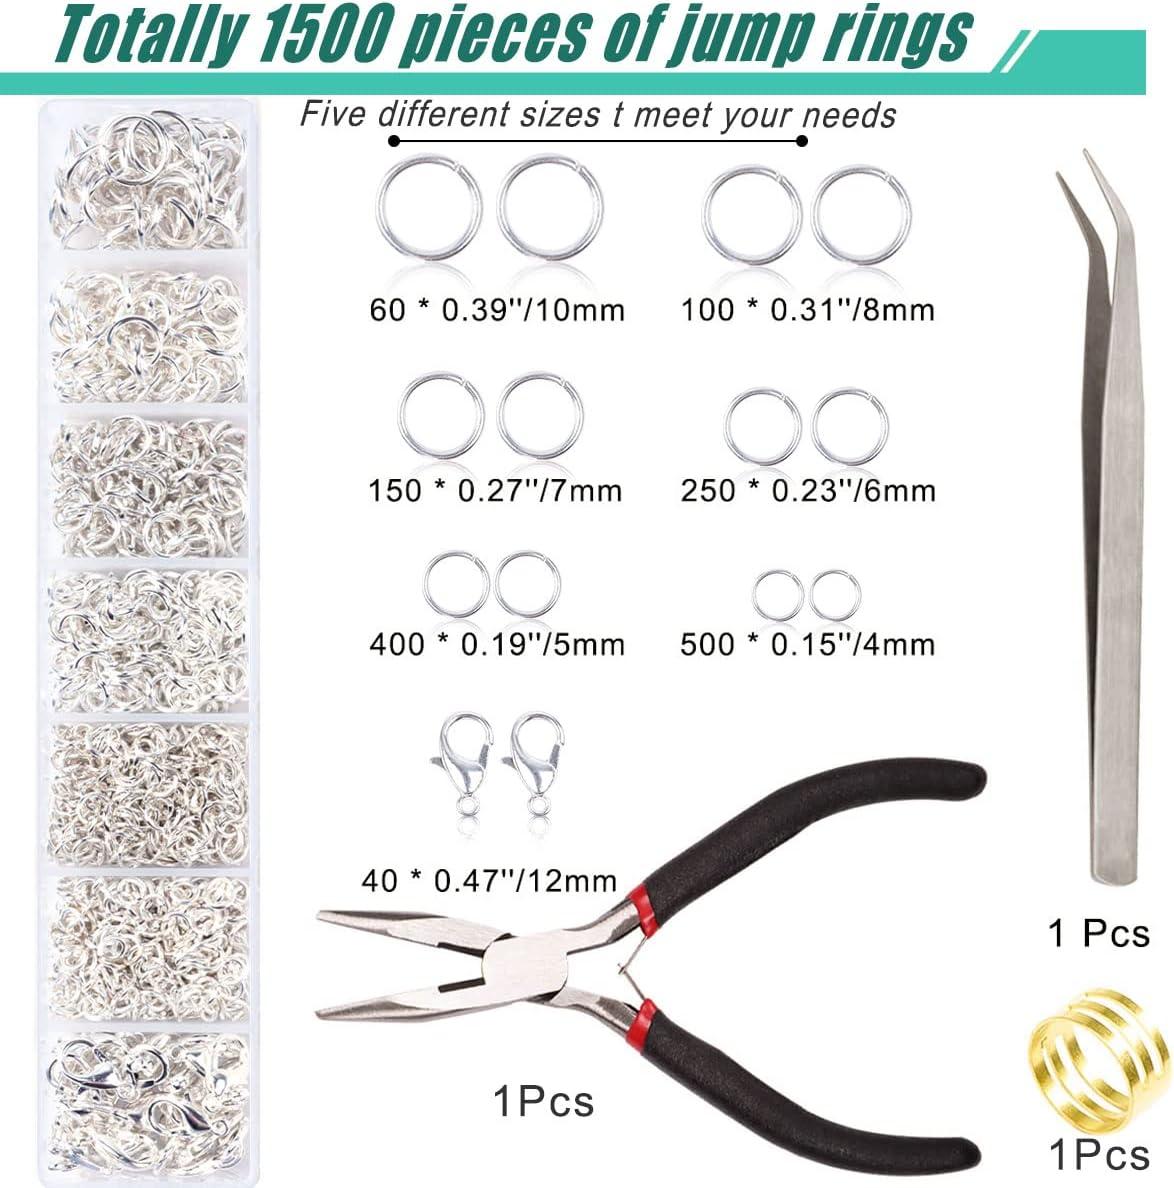 Jump Rings for Jewelry Making Kit 1500pcs Jewelry Repair Kit for Necklace  Bracelet Lobster Clasps and Closures Repair Supplies Kit with Pliers  Tweezers-Silver